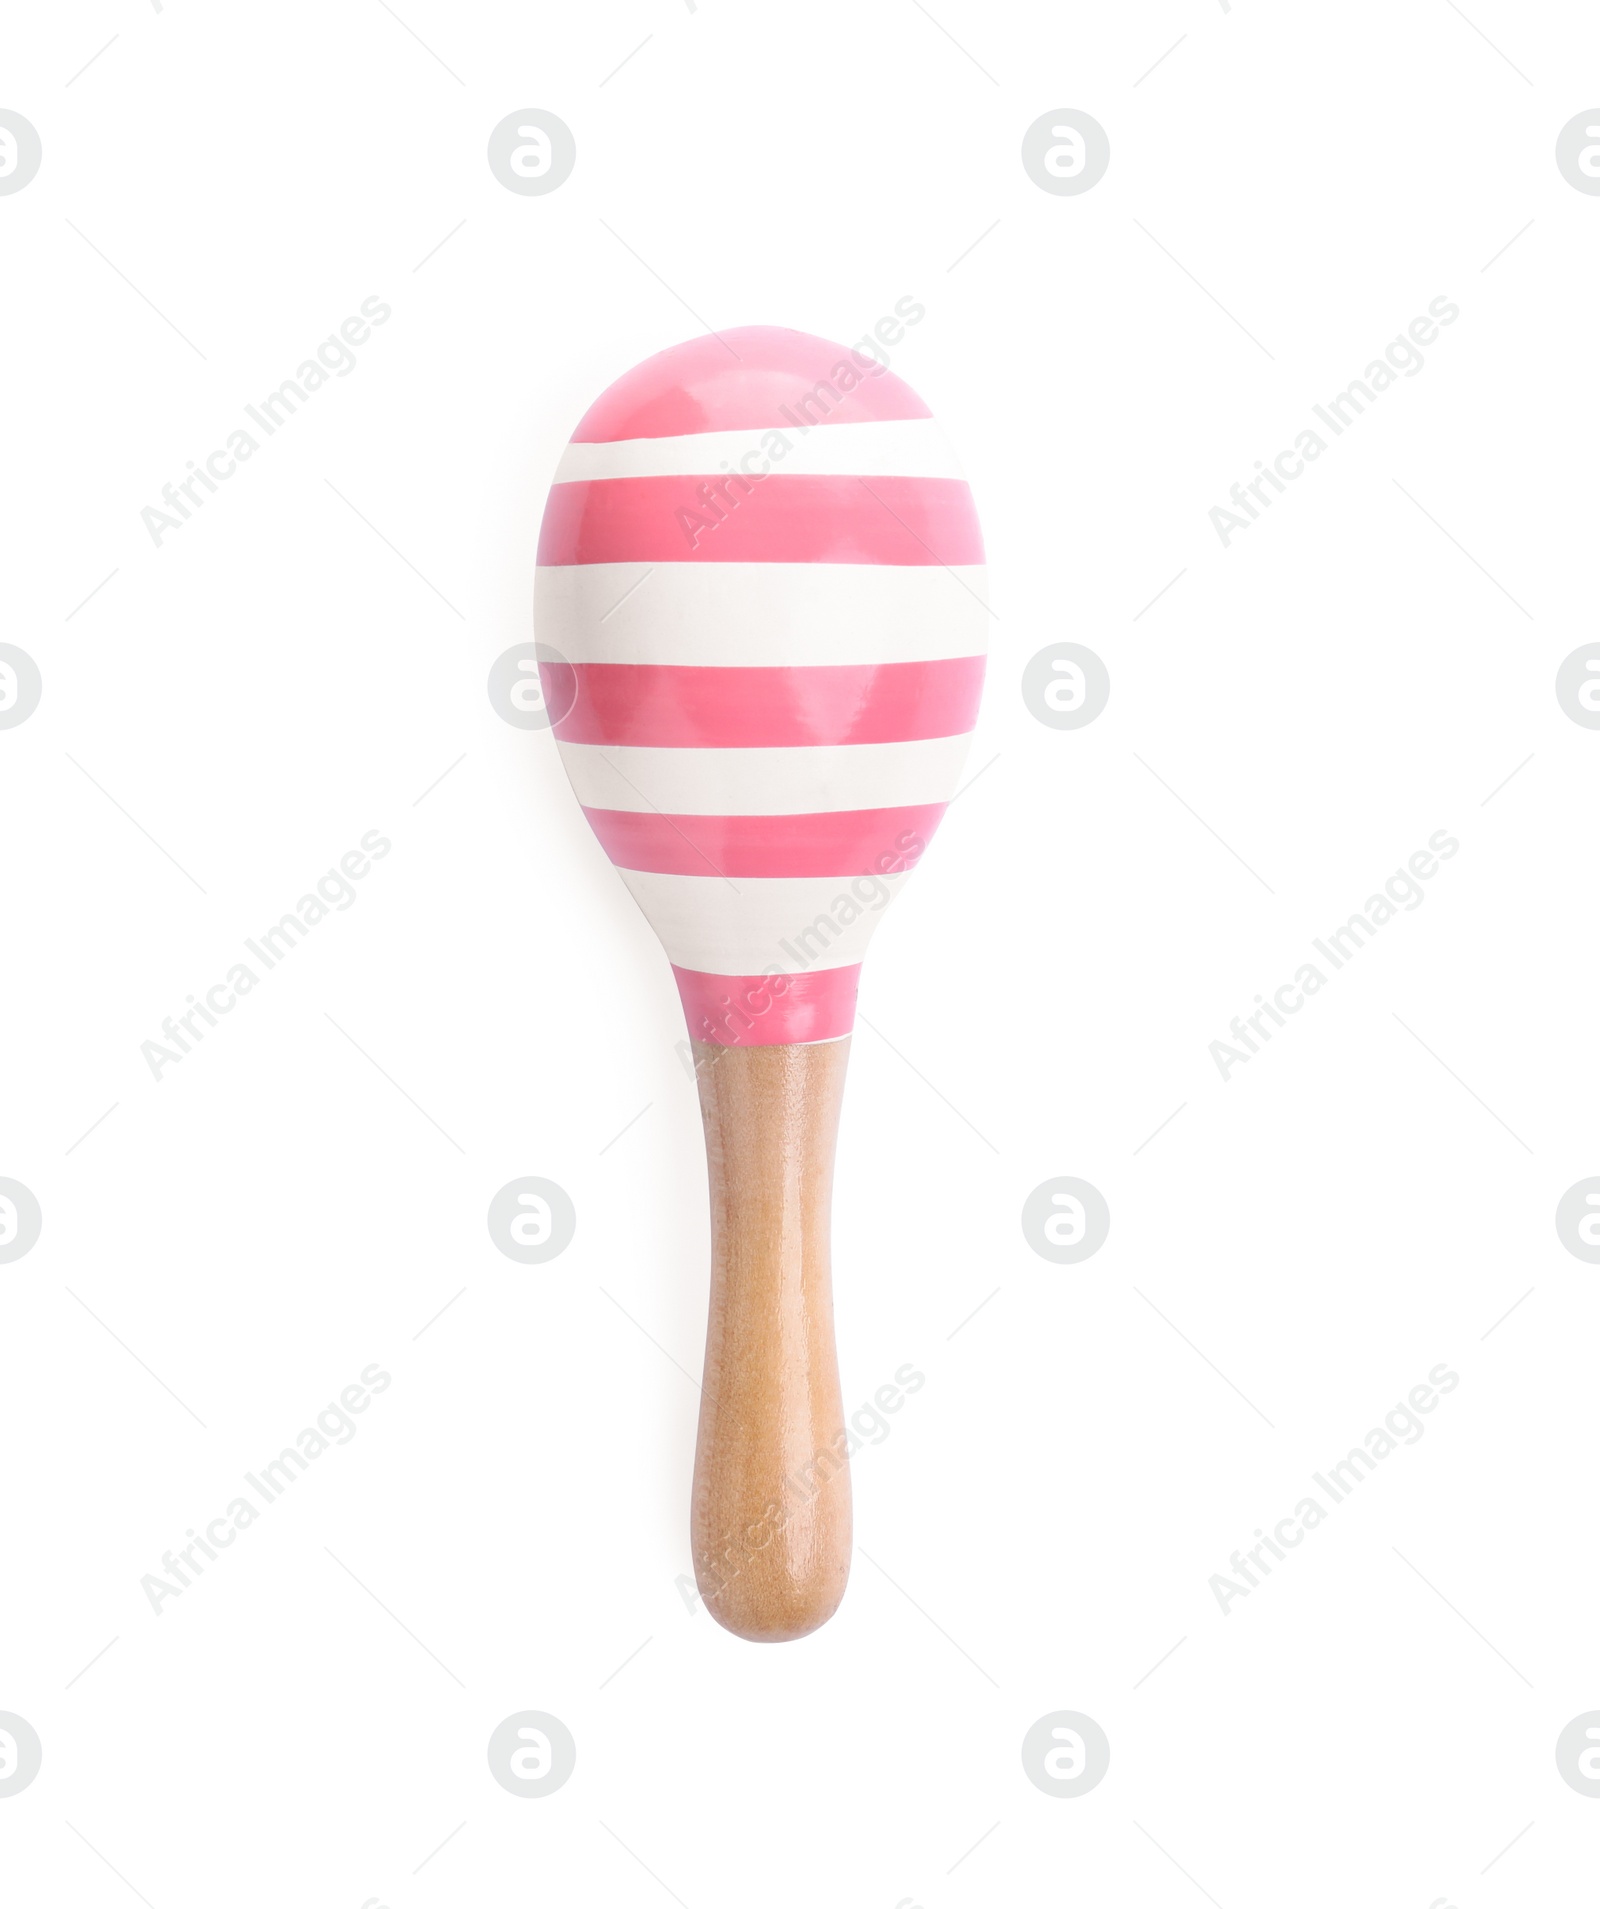 Photo of Wooden toy maraca on white background, top view